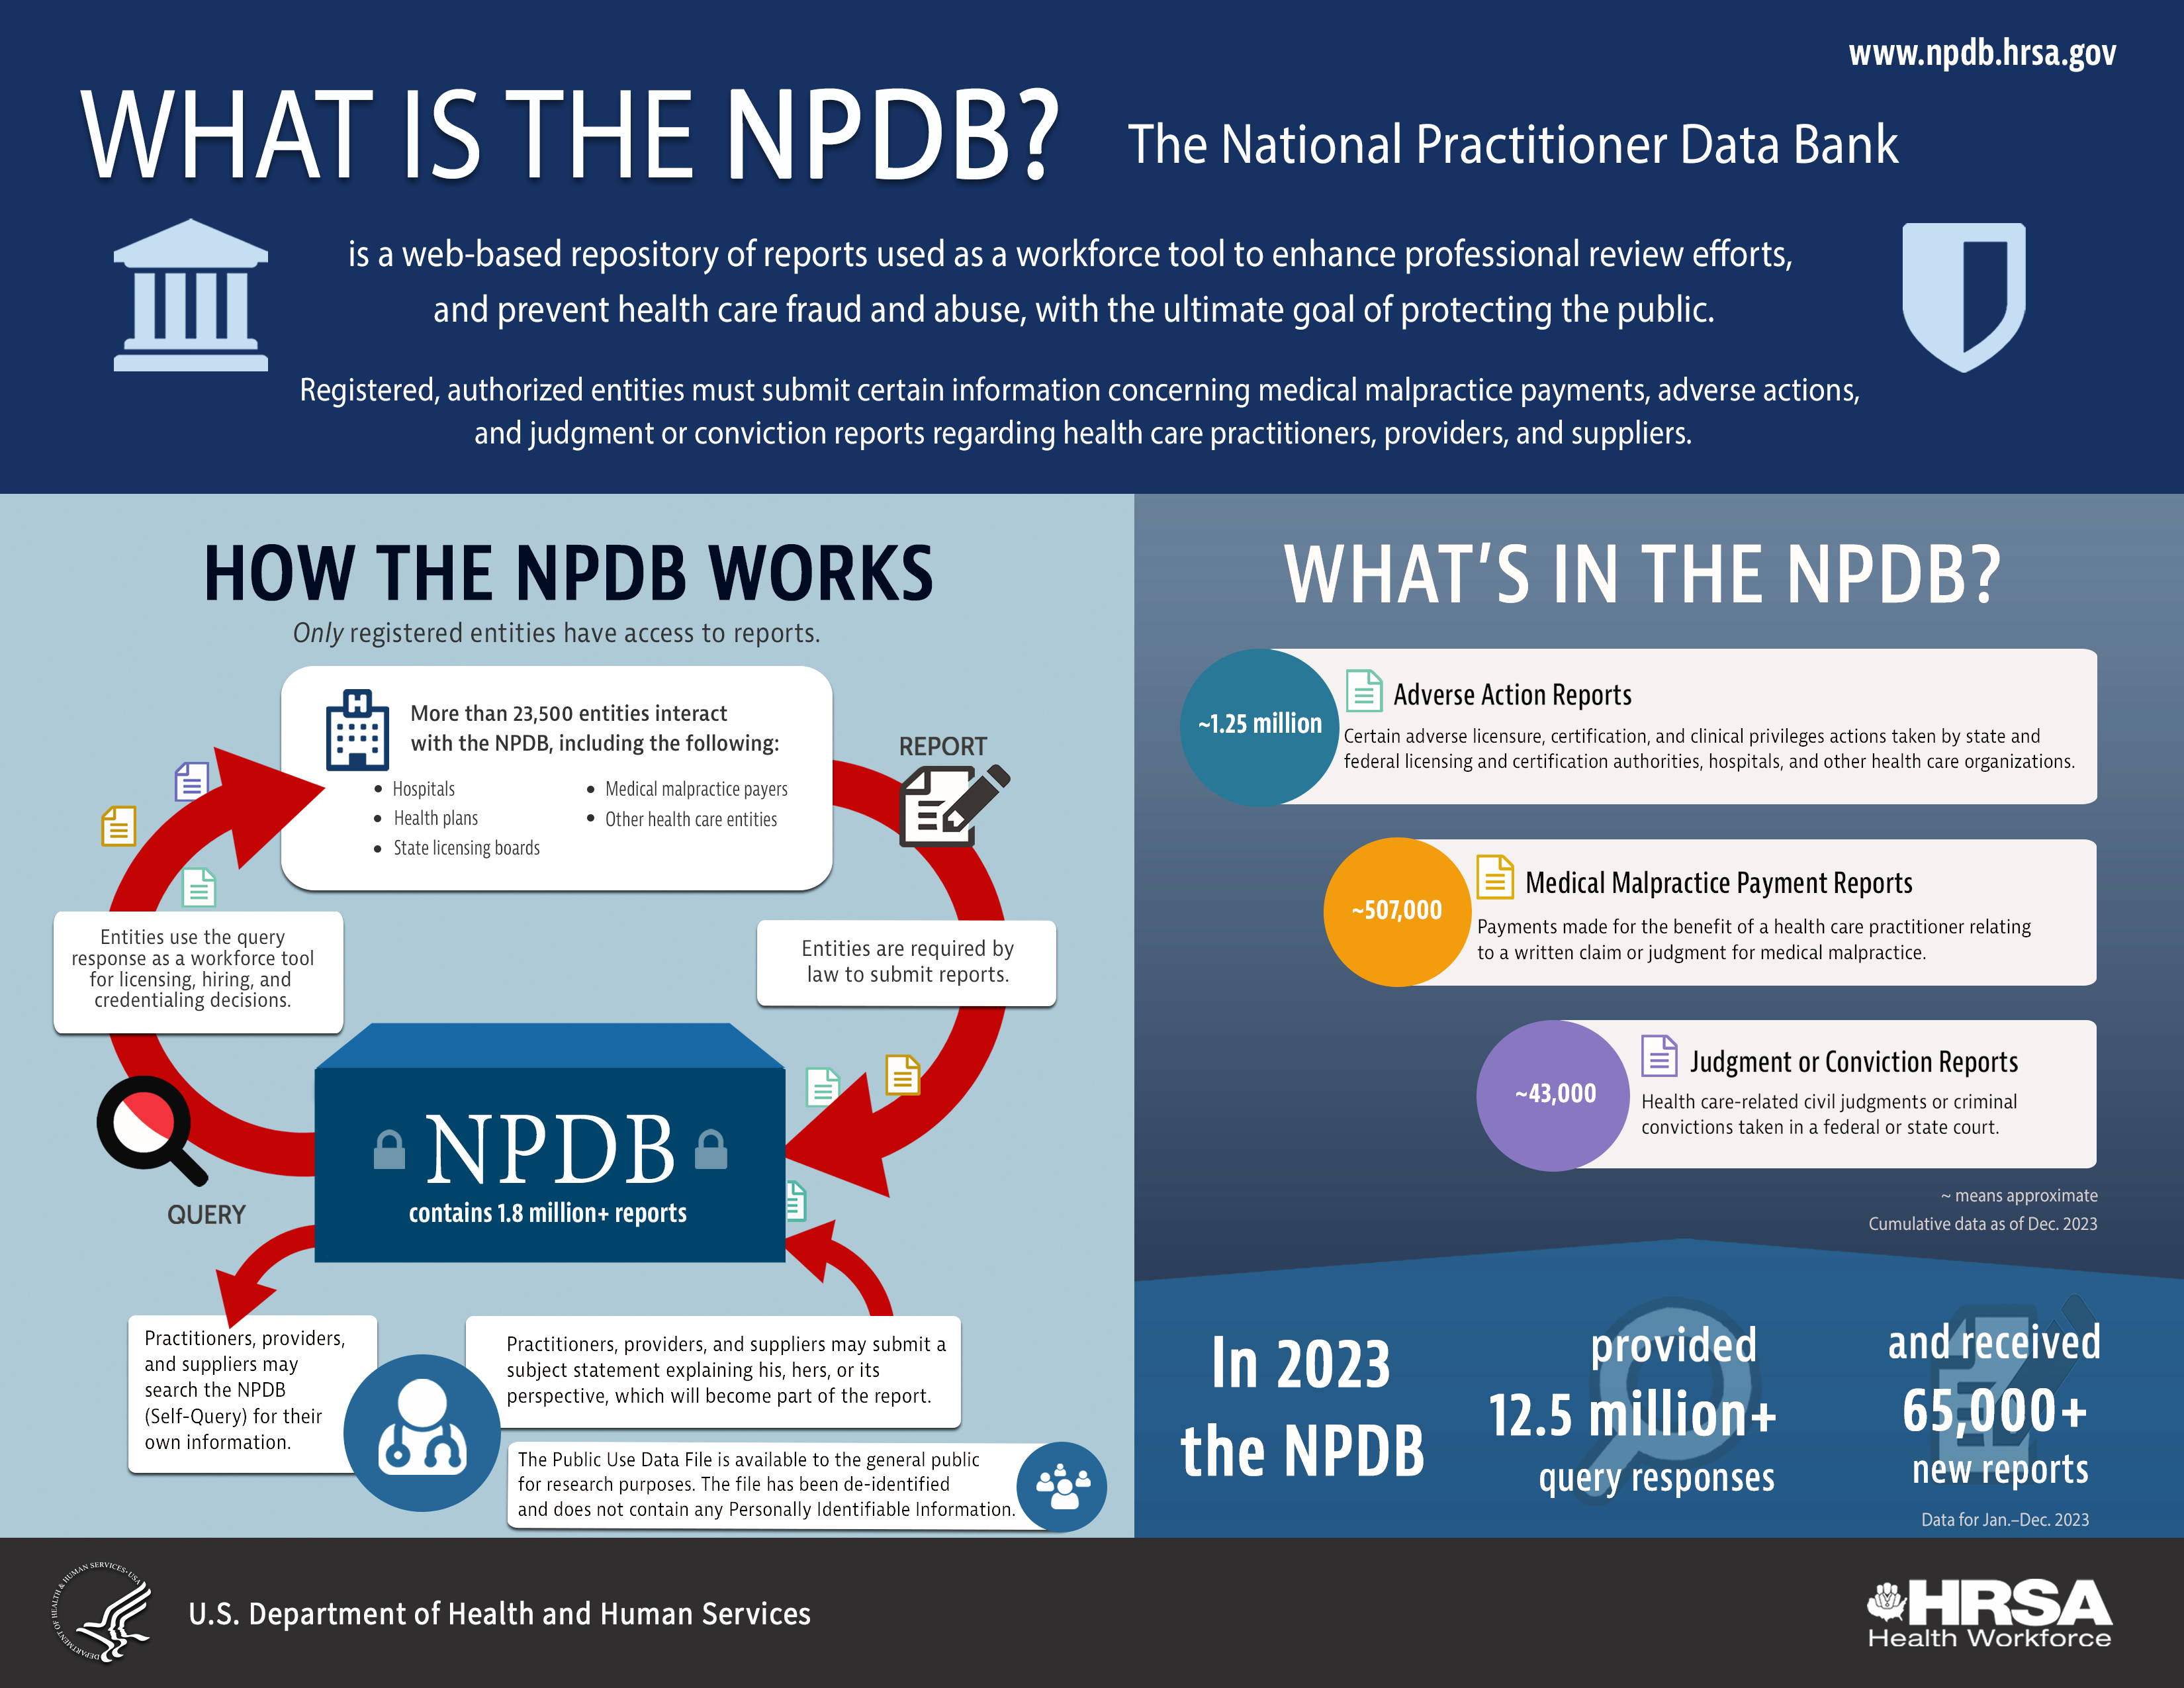 Landscape Version of the What is the NPDB Infographic. Text-only version below.